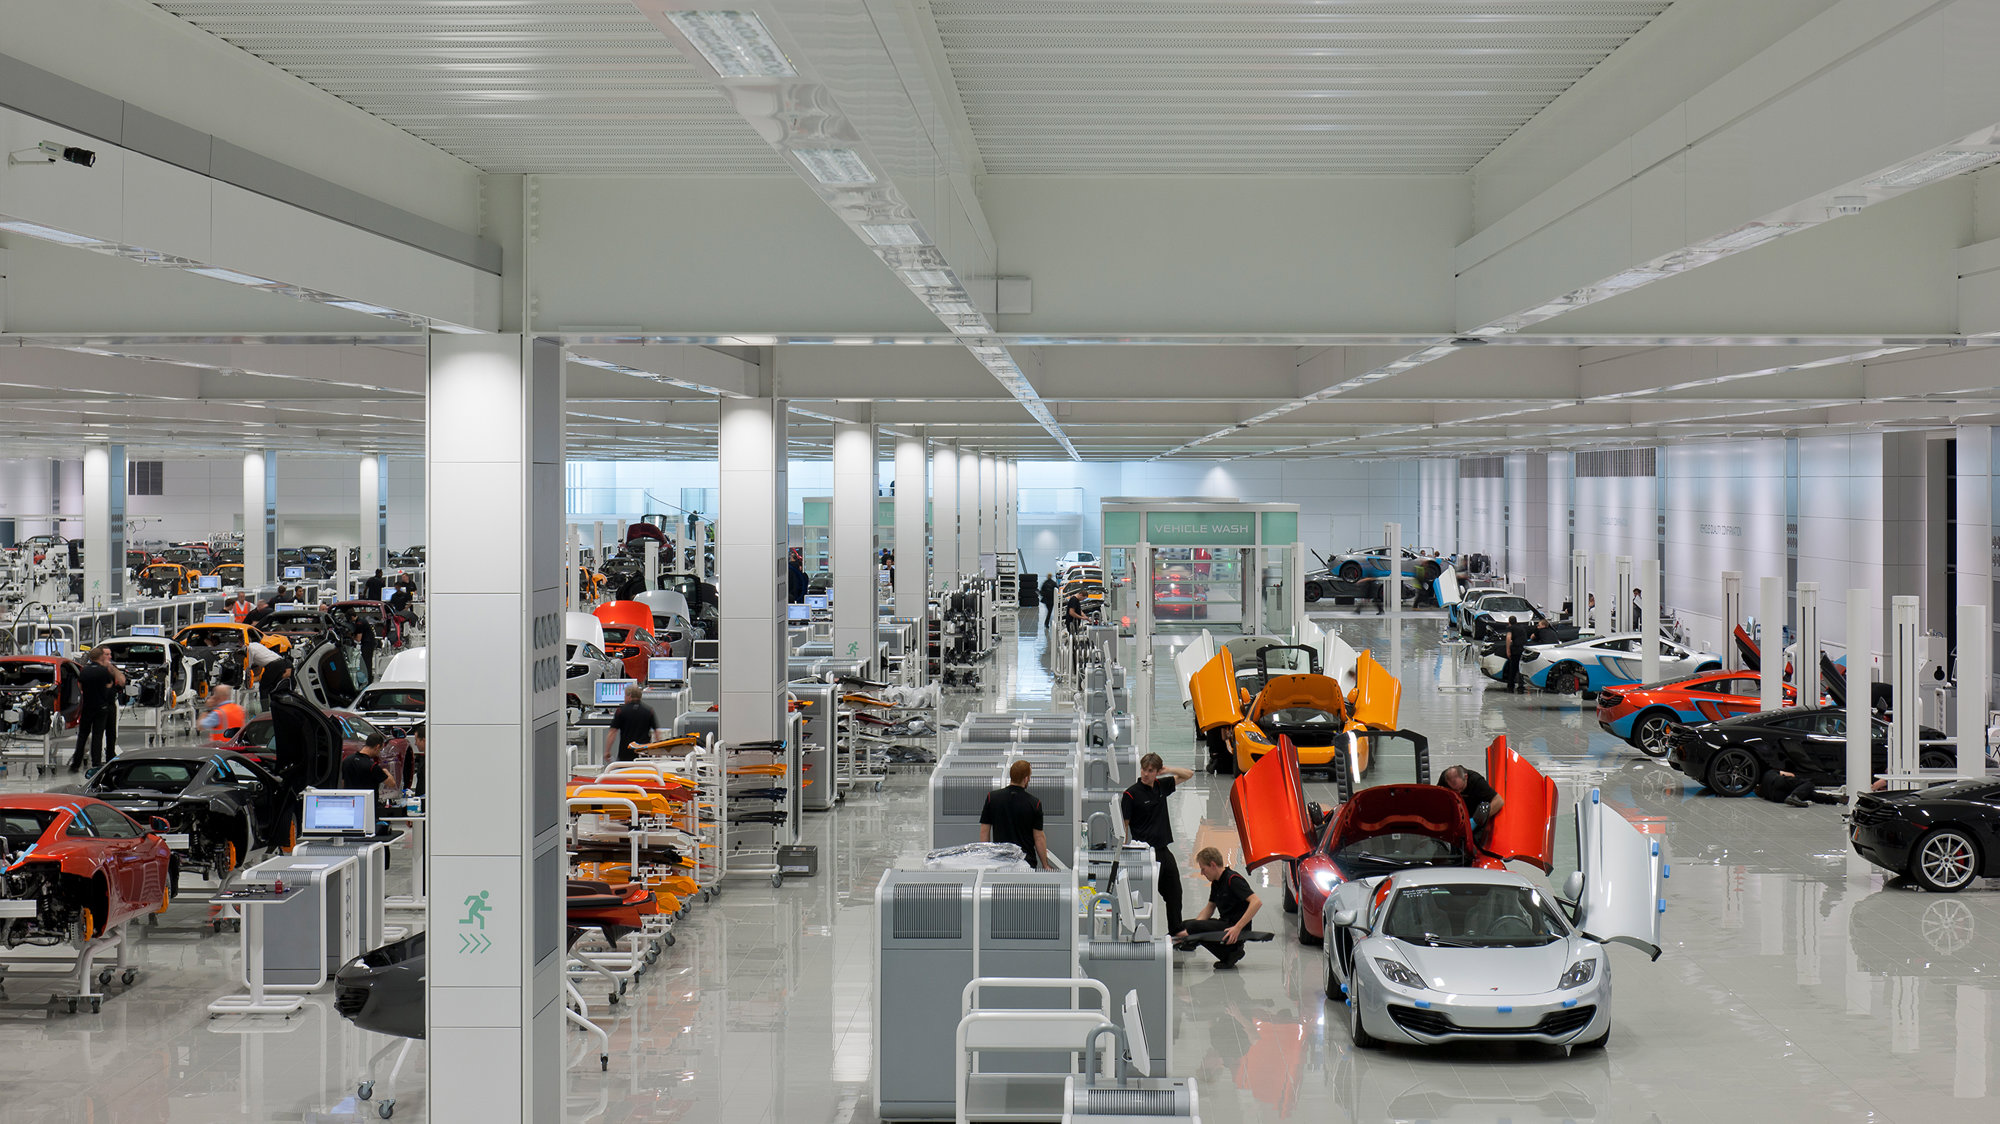 Prime Minister Attends Official Opening Of The Mclaren Production Centre